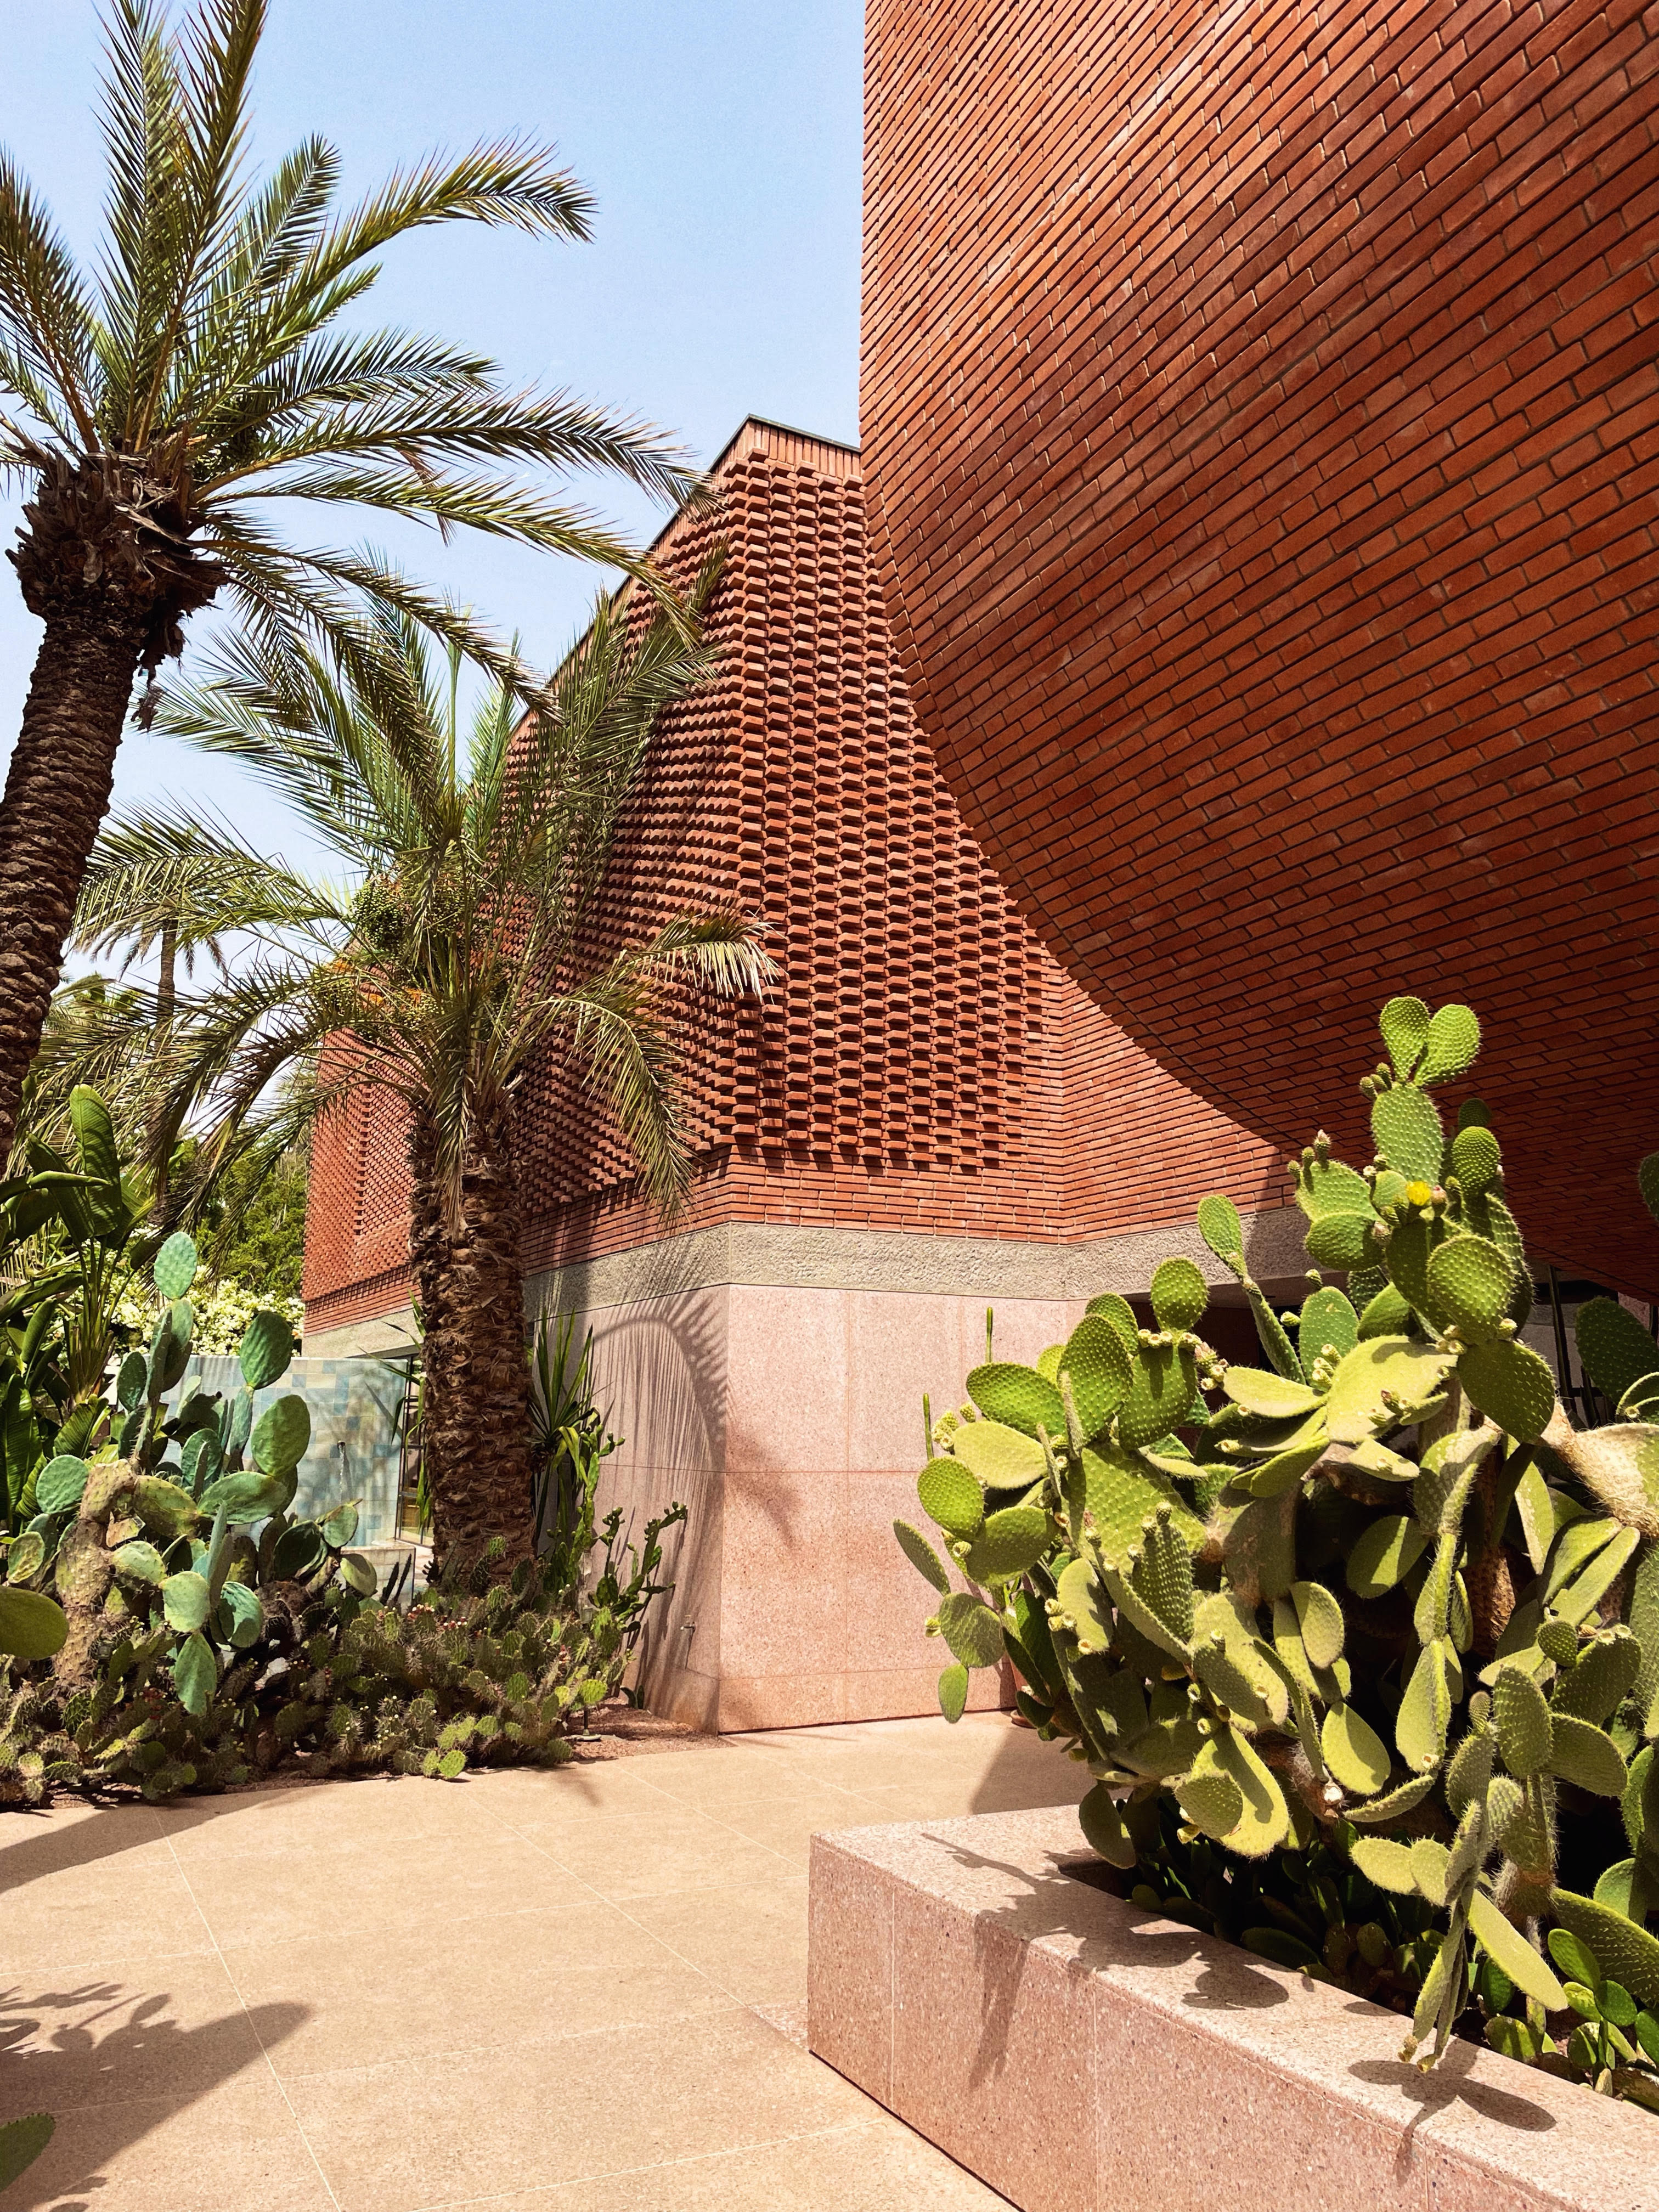 Musée Yves Saint Laurent, red brick building with cacti